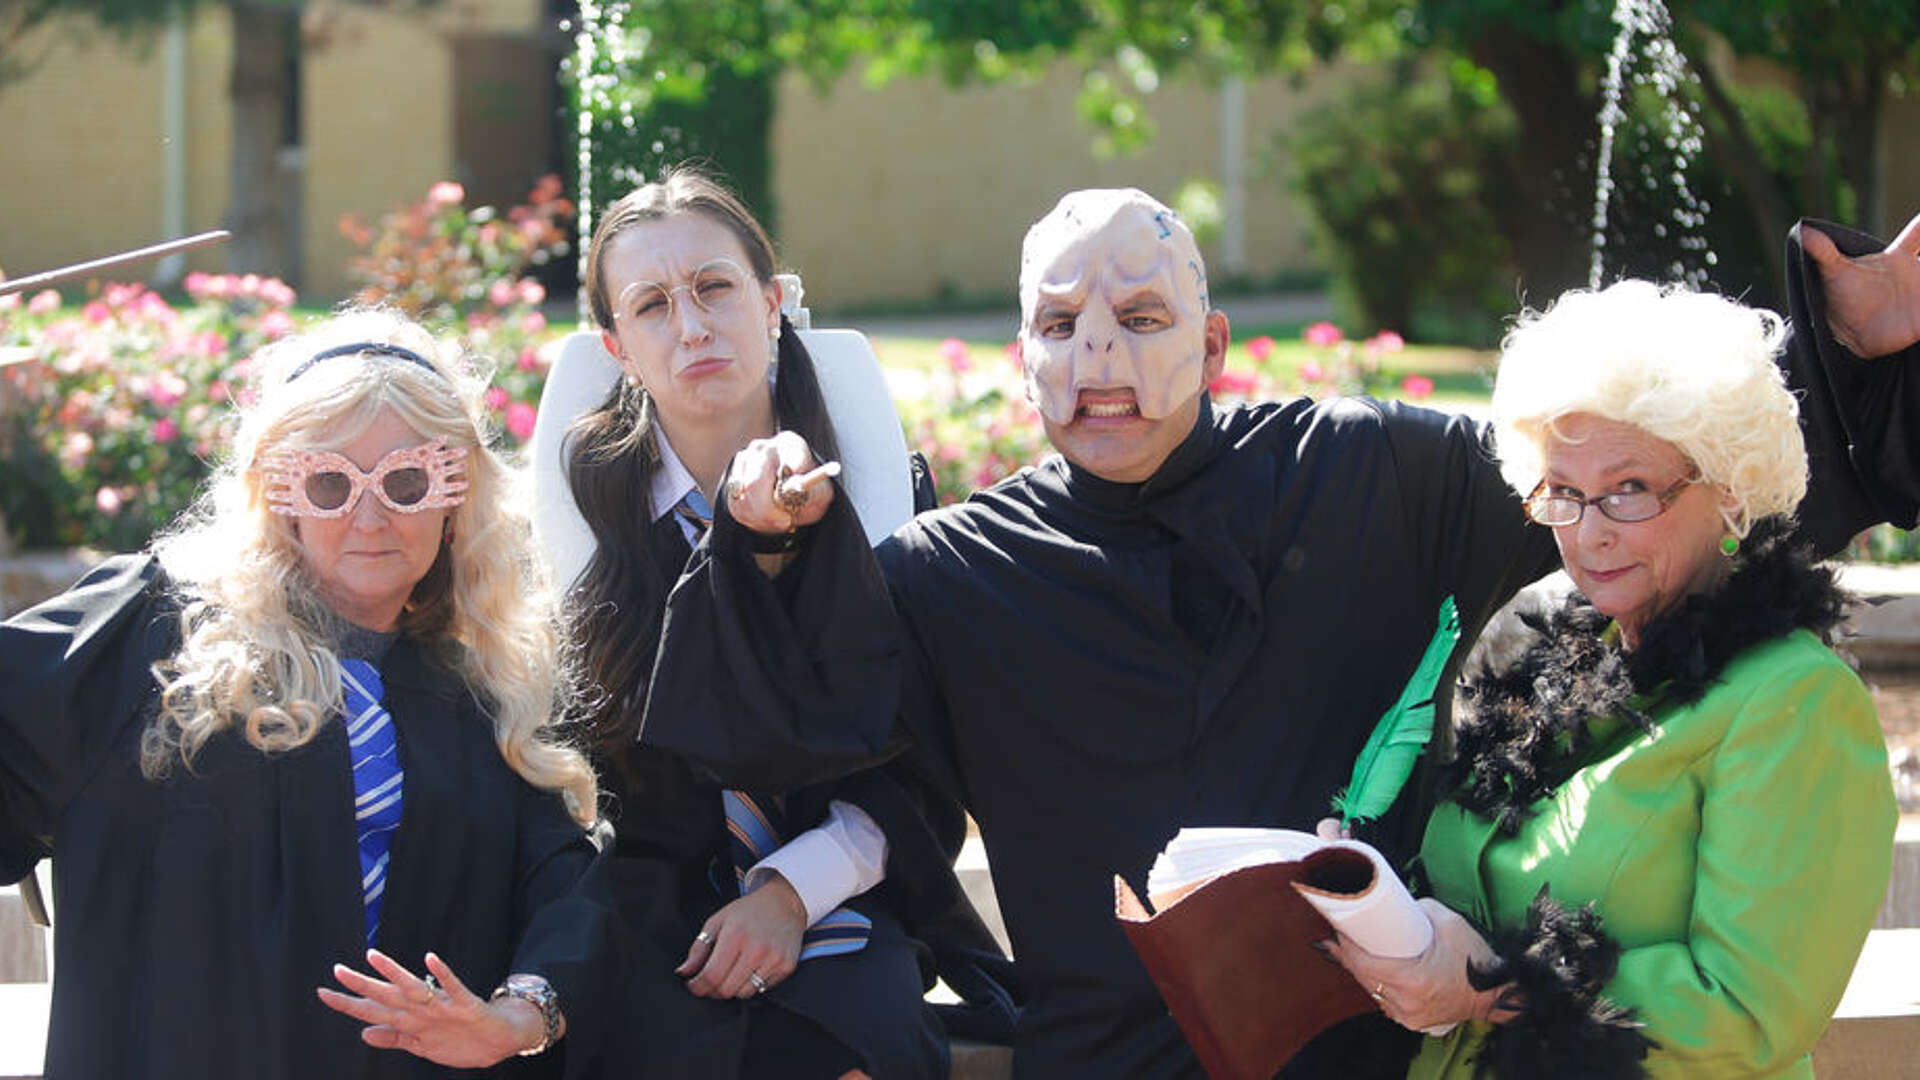 Some LCU faculty and staff in Harry Potter costumes